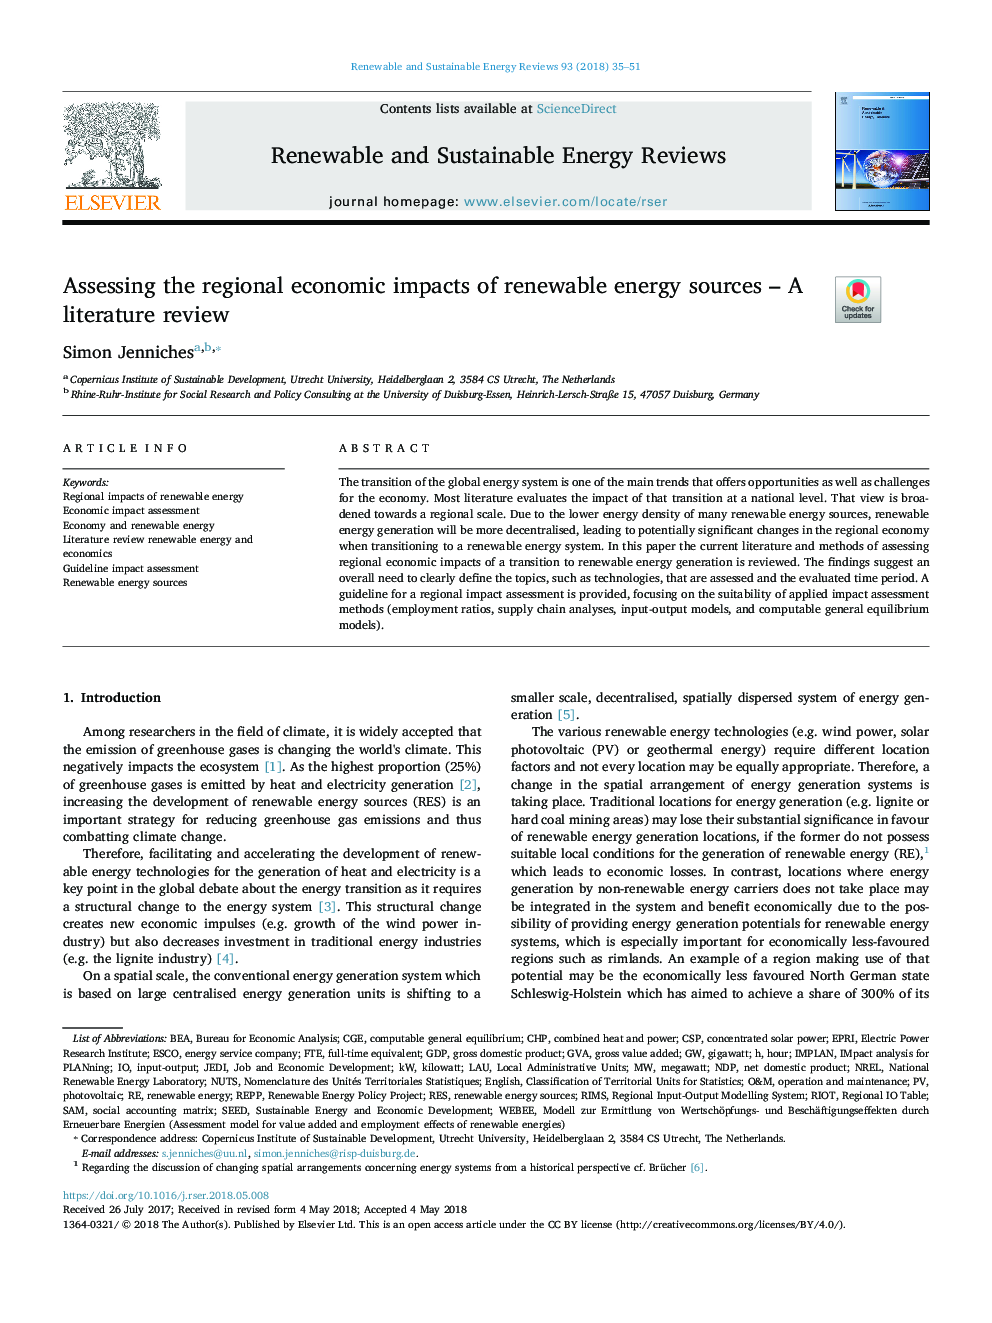 Assessing the regional economic impacts of renewable energy sources - A literature review